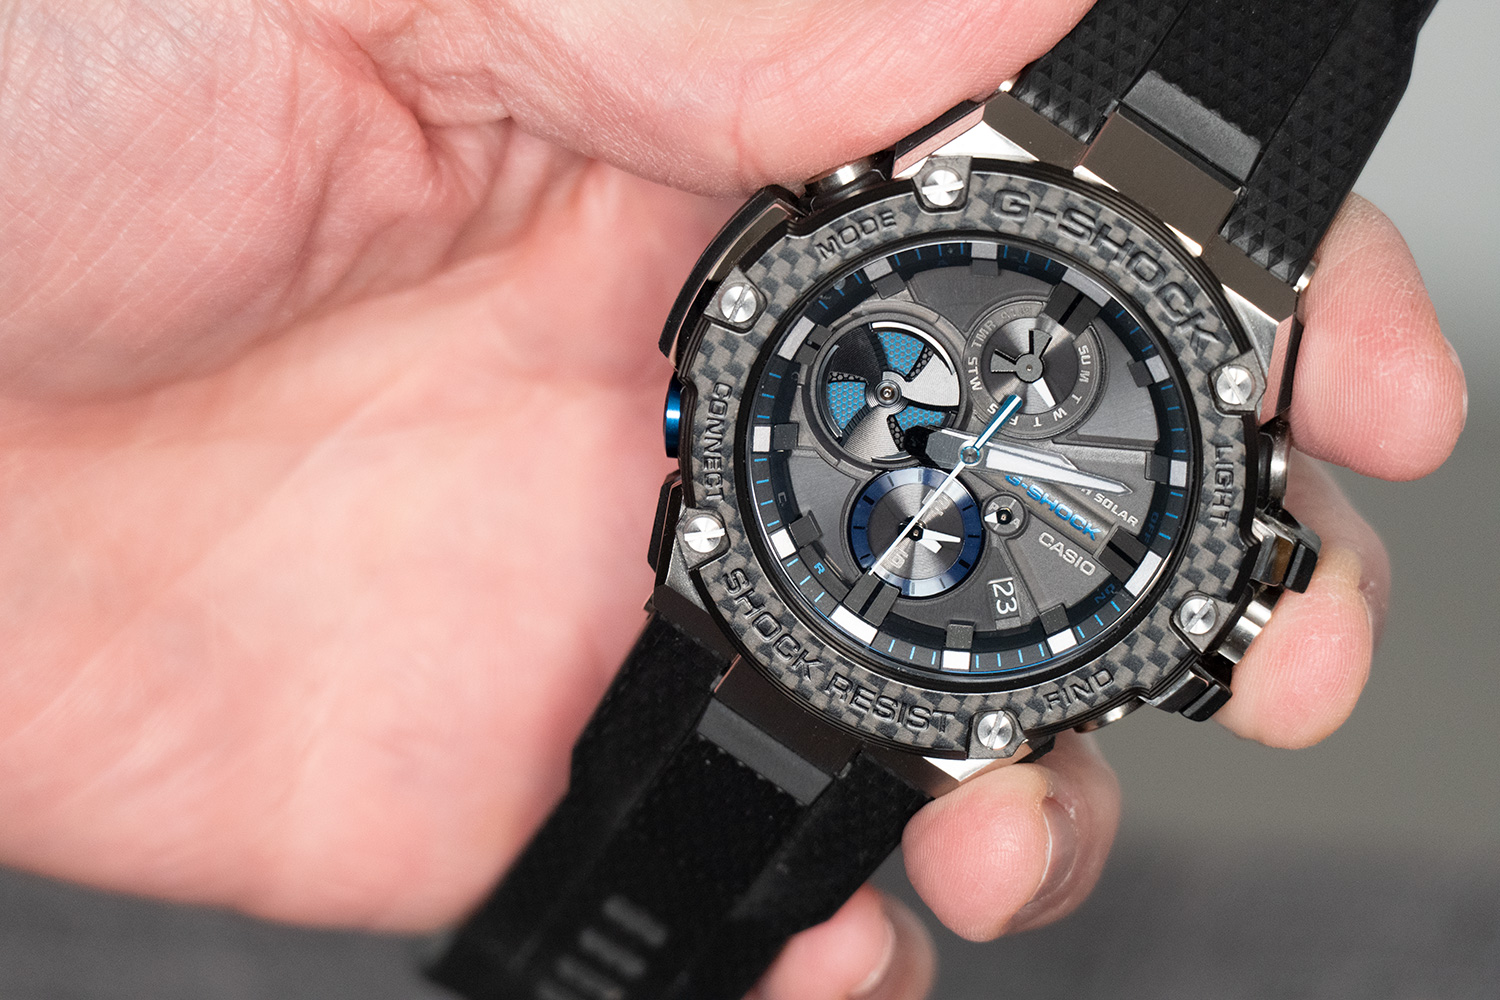 Casio's All-Metal G-Shock Uses its Smart Tech Carefully, For